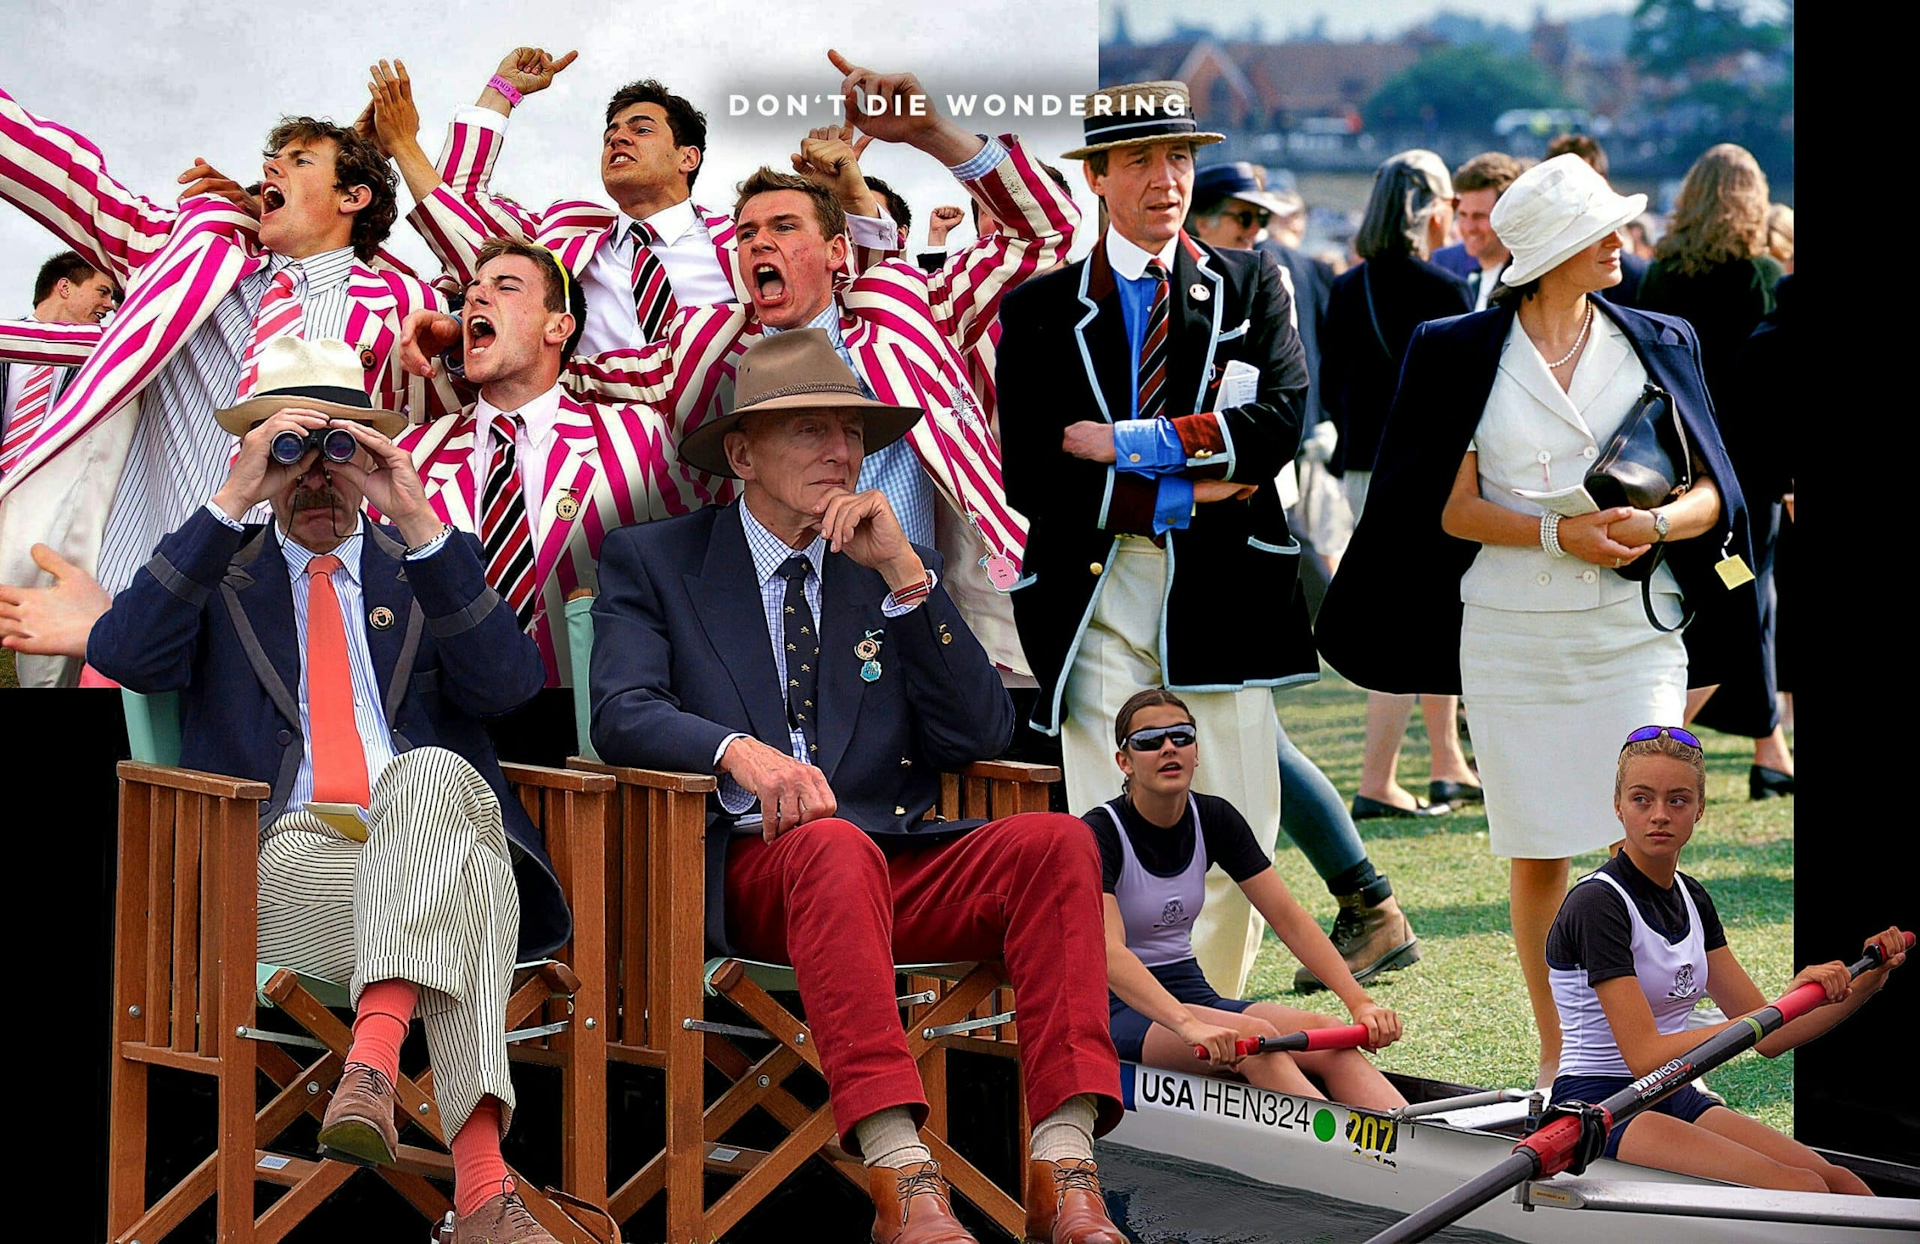 Catch Up With Day One Of The Henley Royal Regatta